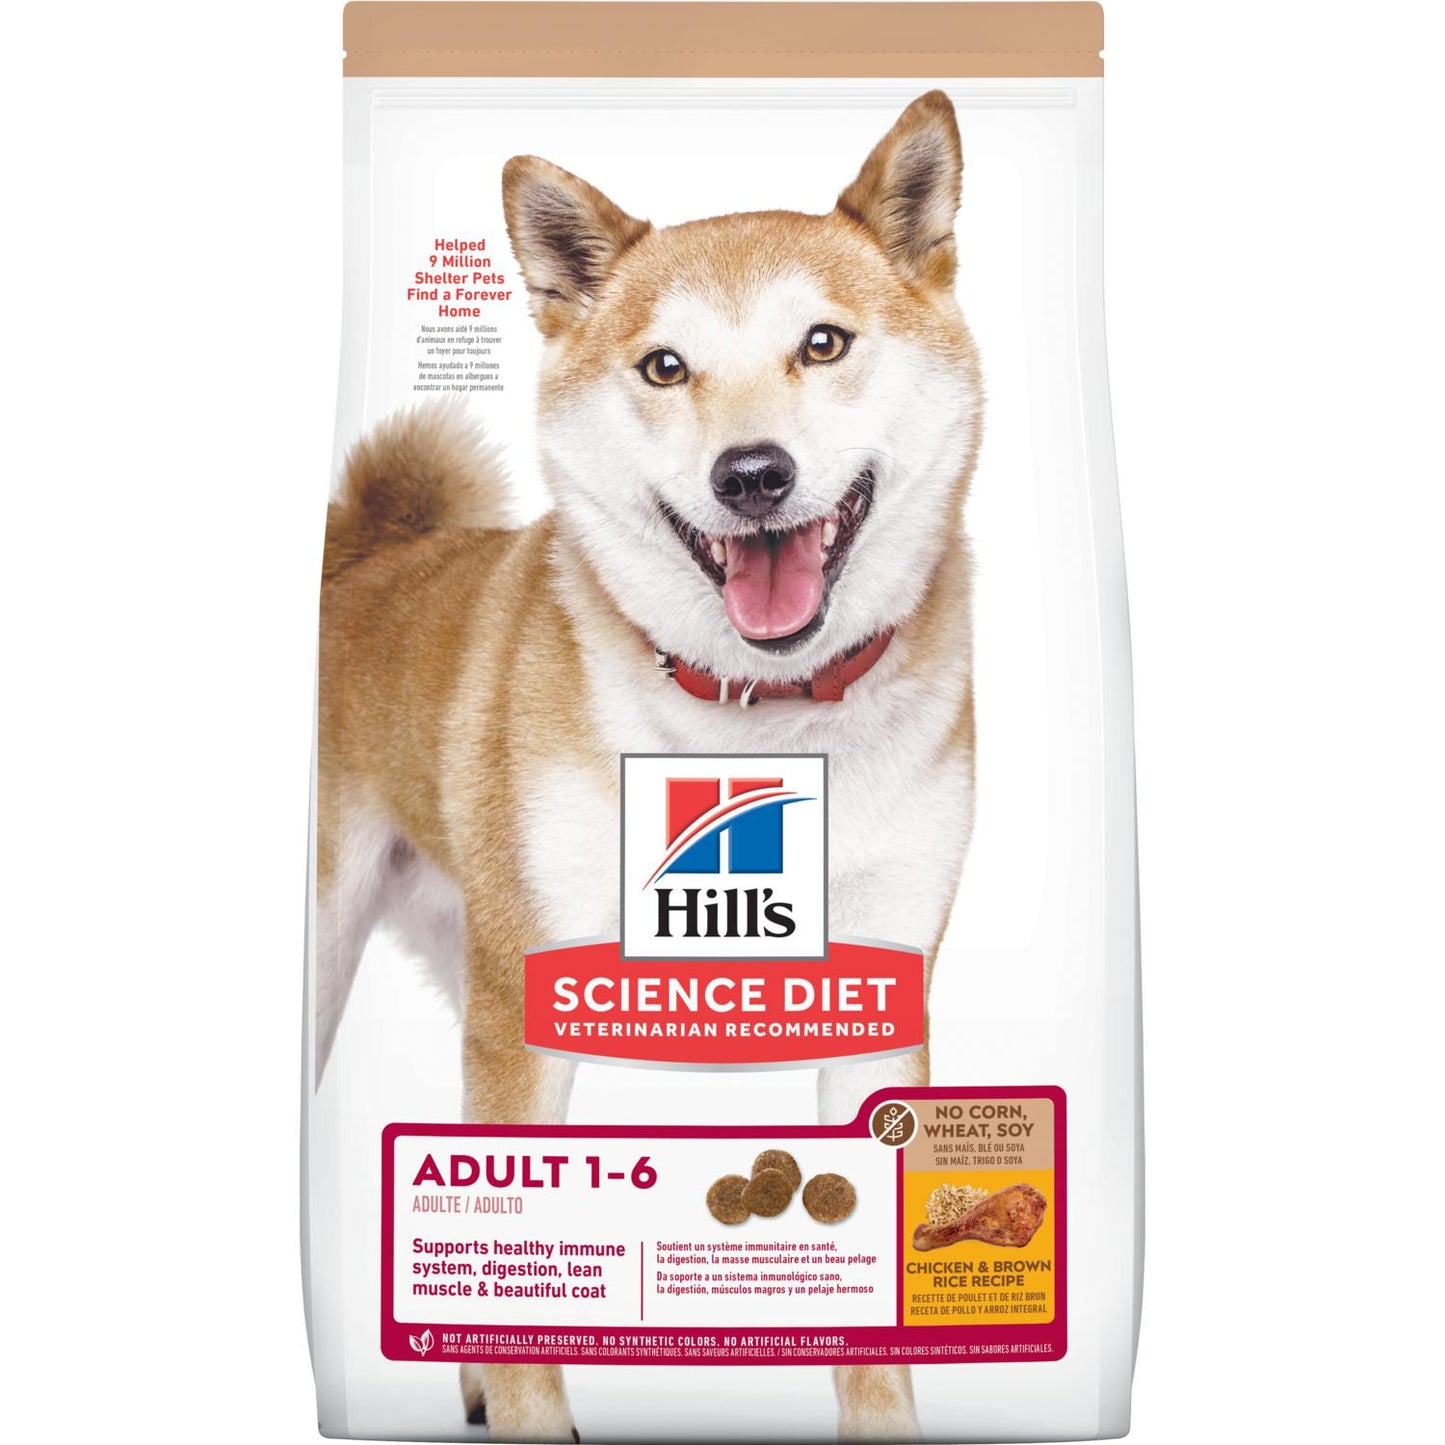 Hill's Science Diet Adult 1-6 No Corn, Wheat, Soy K9 Adult Dog Food